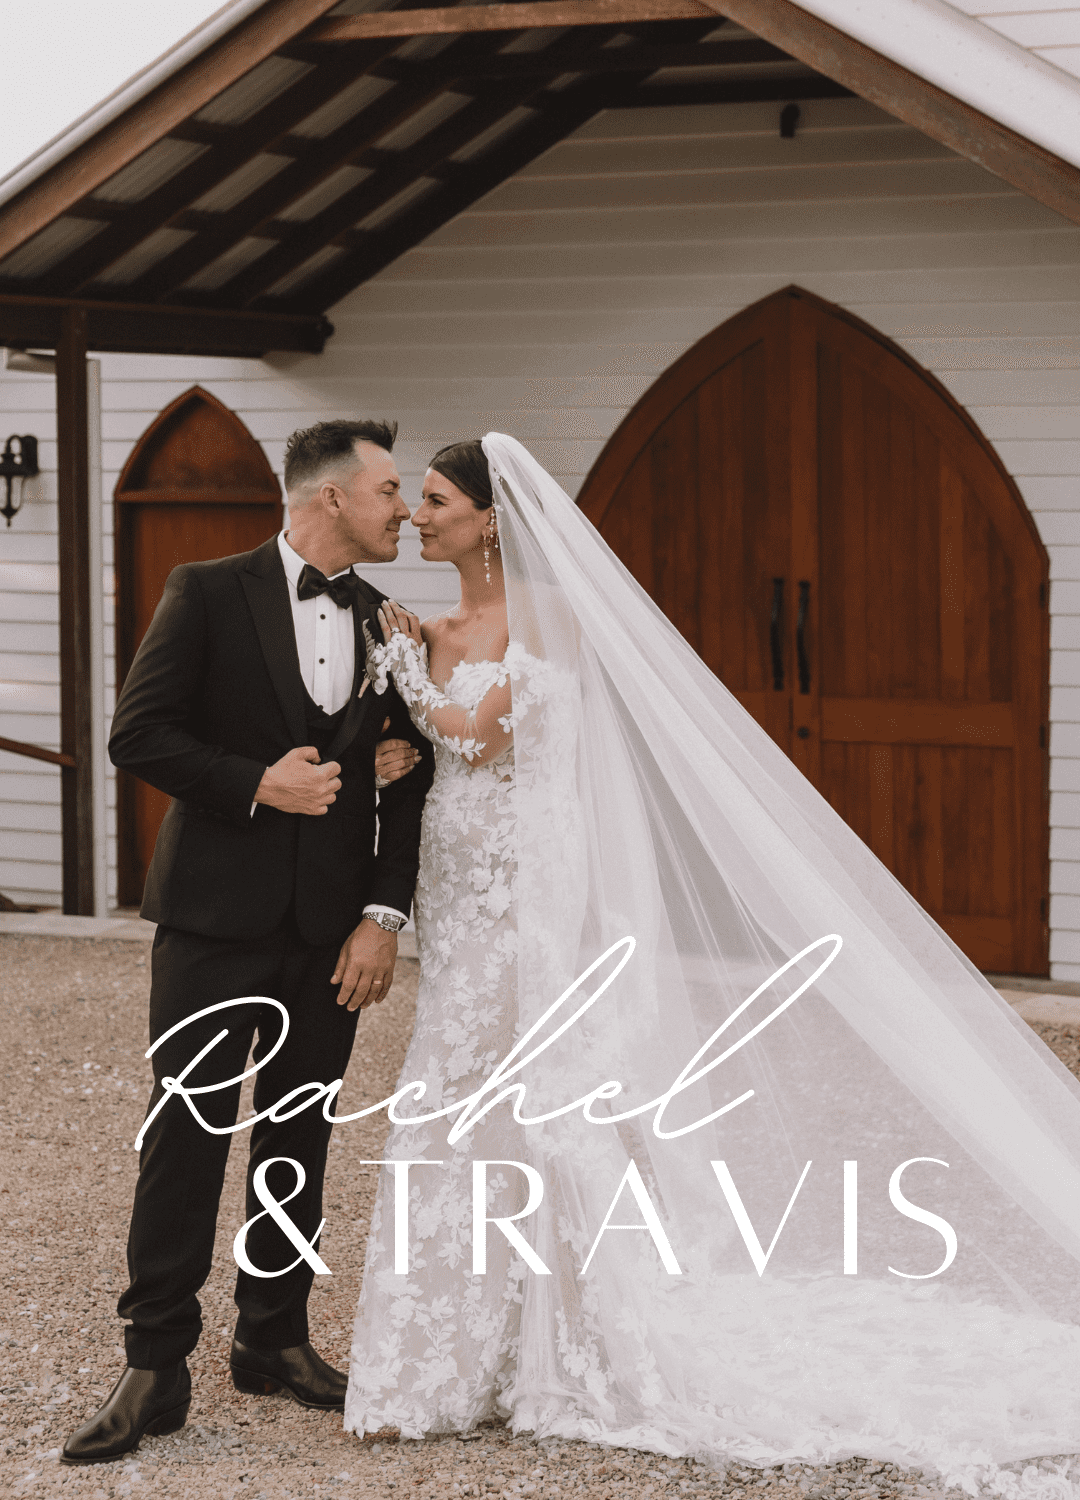 A Christmas meeting to remember: Rachel & Travis - White Lily Couture